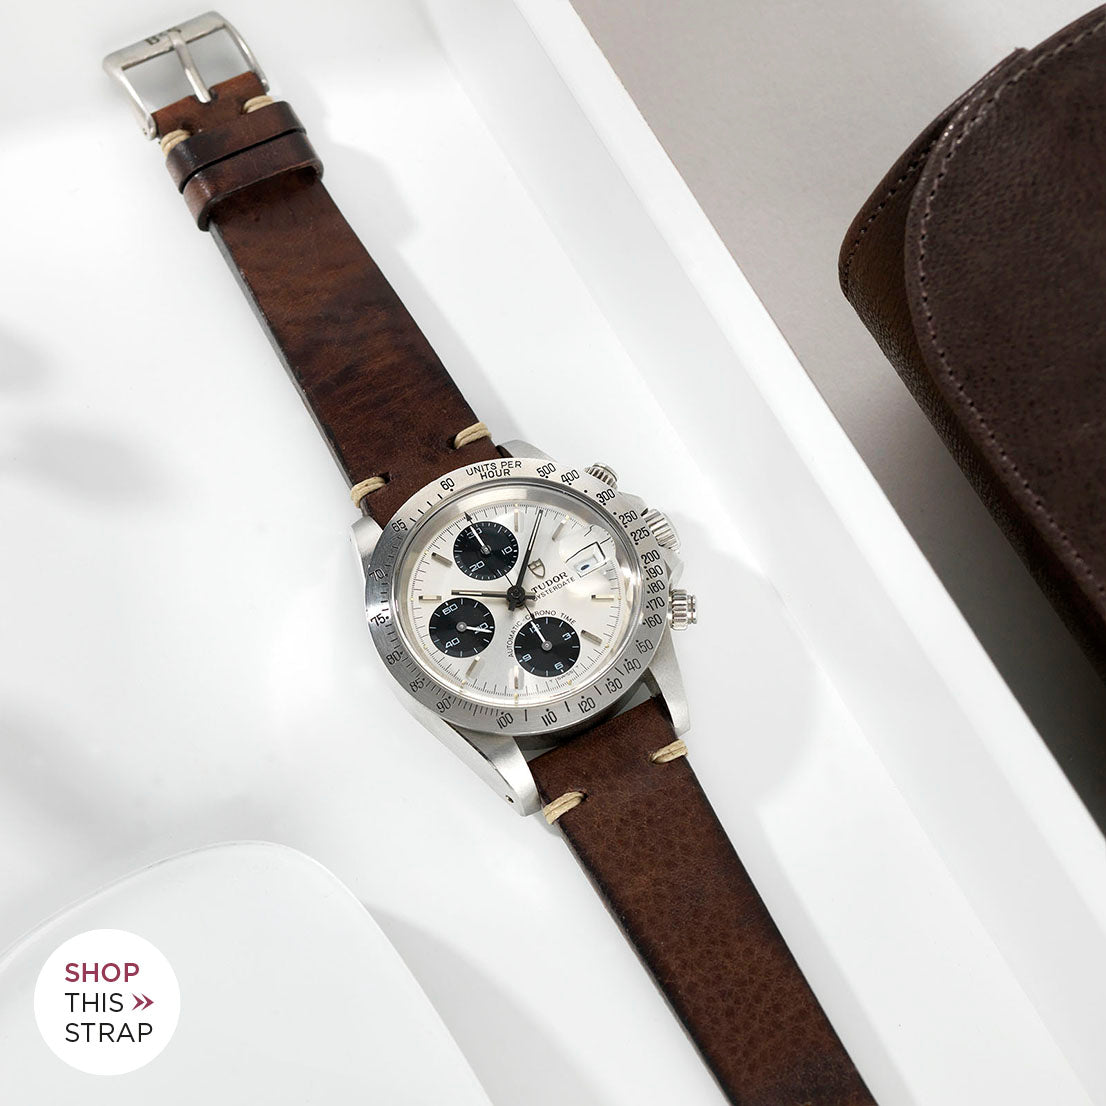 Bulang and Sons_Strap Guide_The Tudor Big Block Silver Dial_Lumberjack Brown Leather Watch Strap